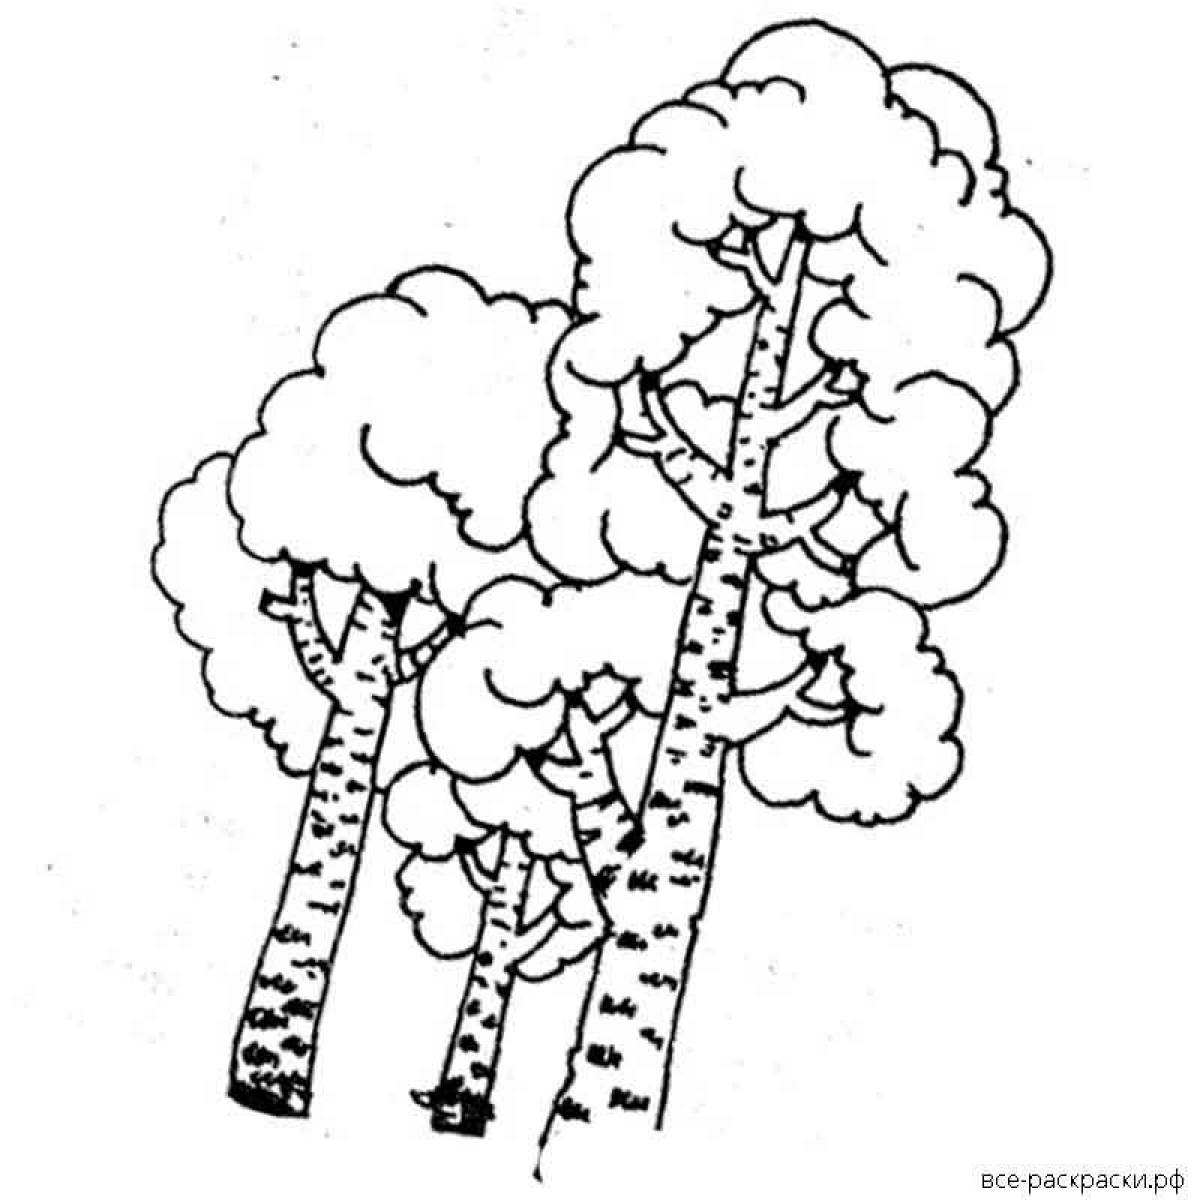 Funny birch coloring book for kids